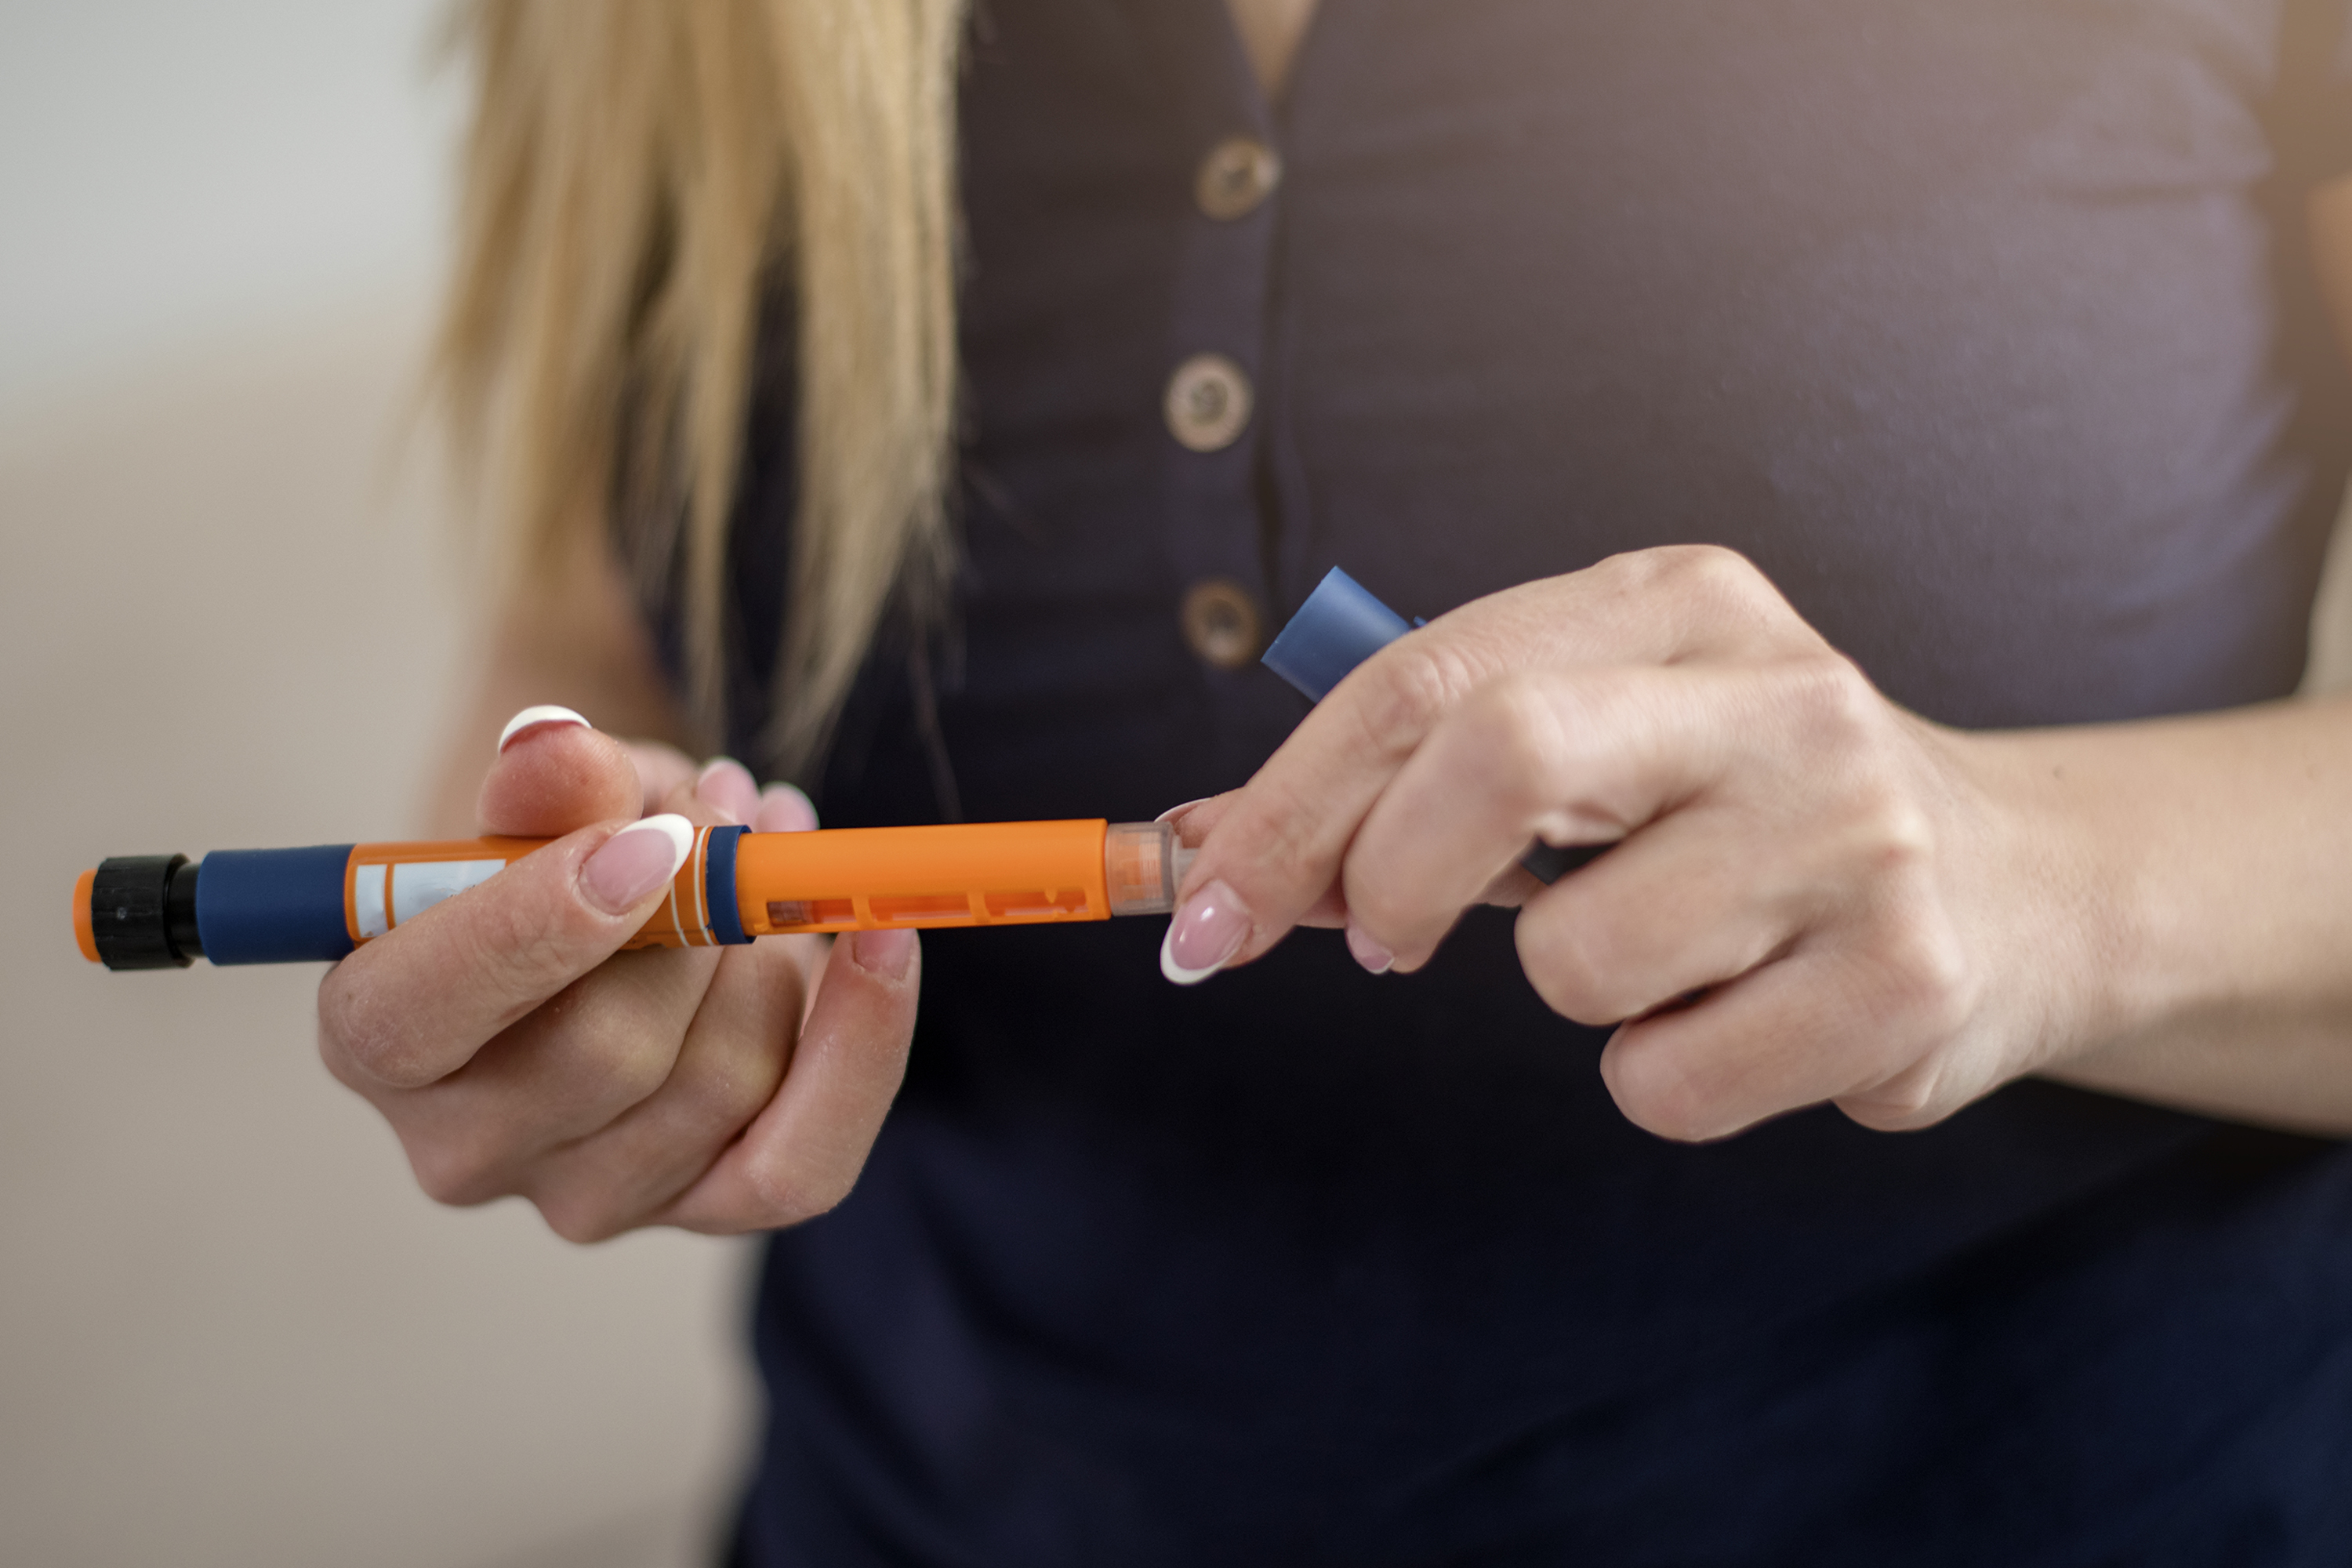 Inject Insulin With Steady Shot For Diabetes Pen Needles